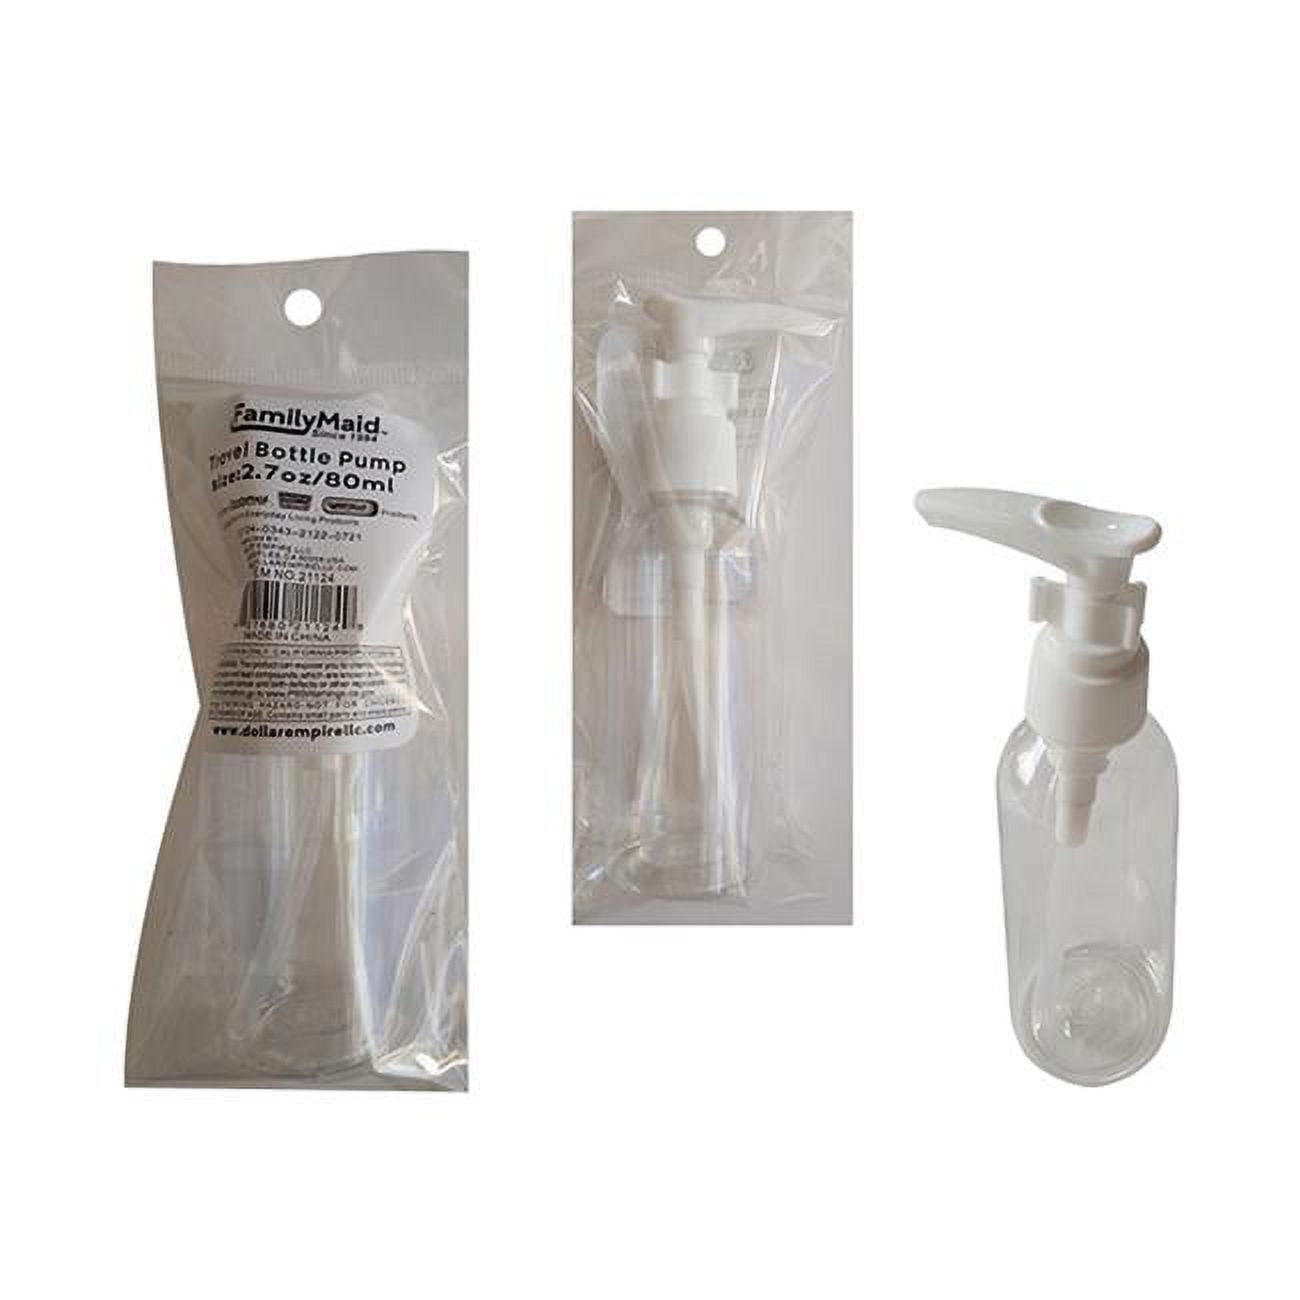 Picture of Familymaid 21124 2.7 oz Travel Bottle Pump